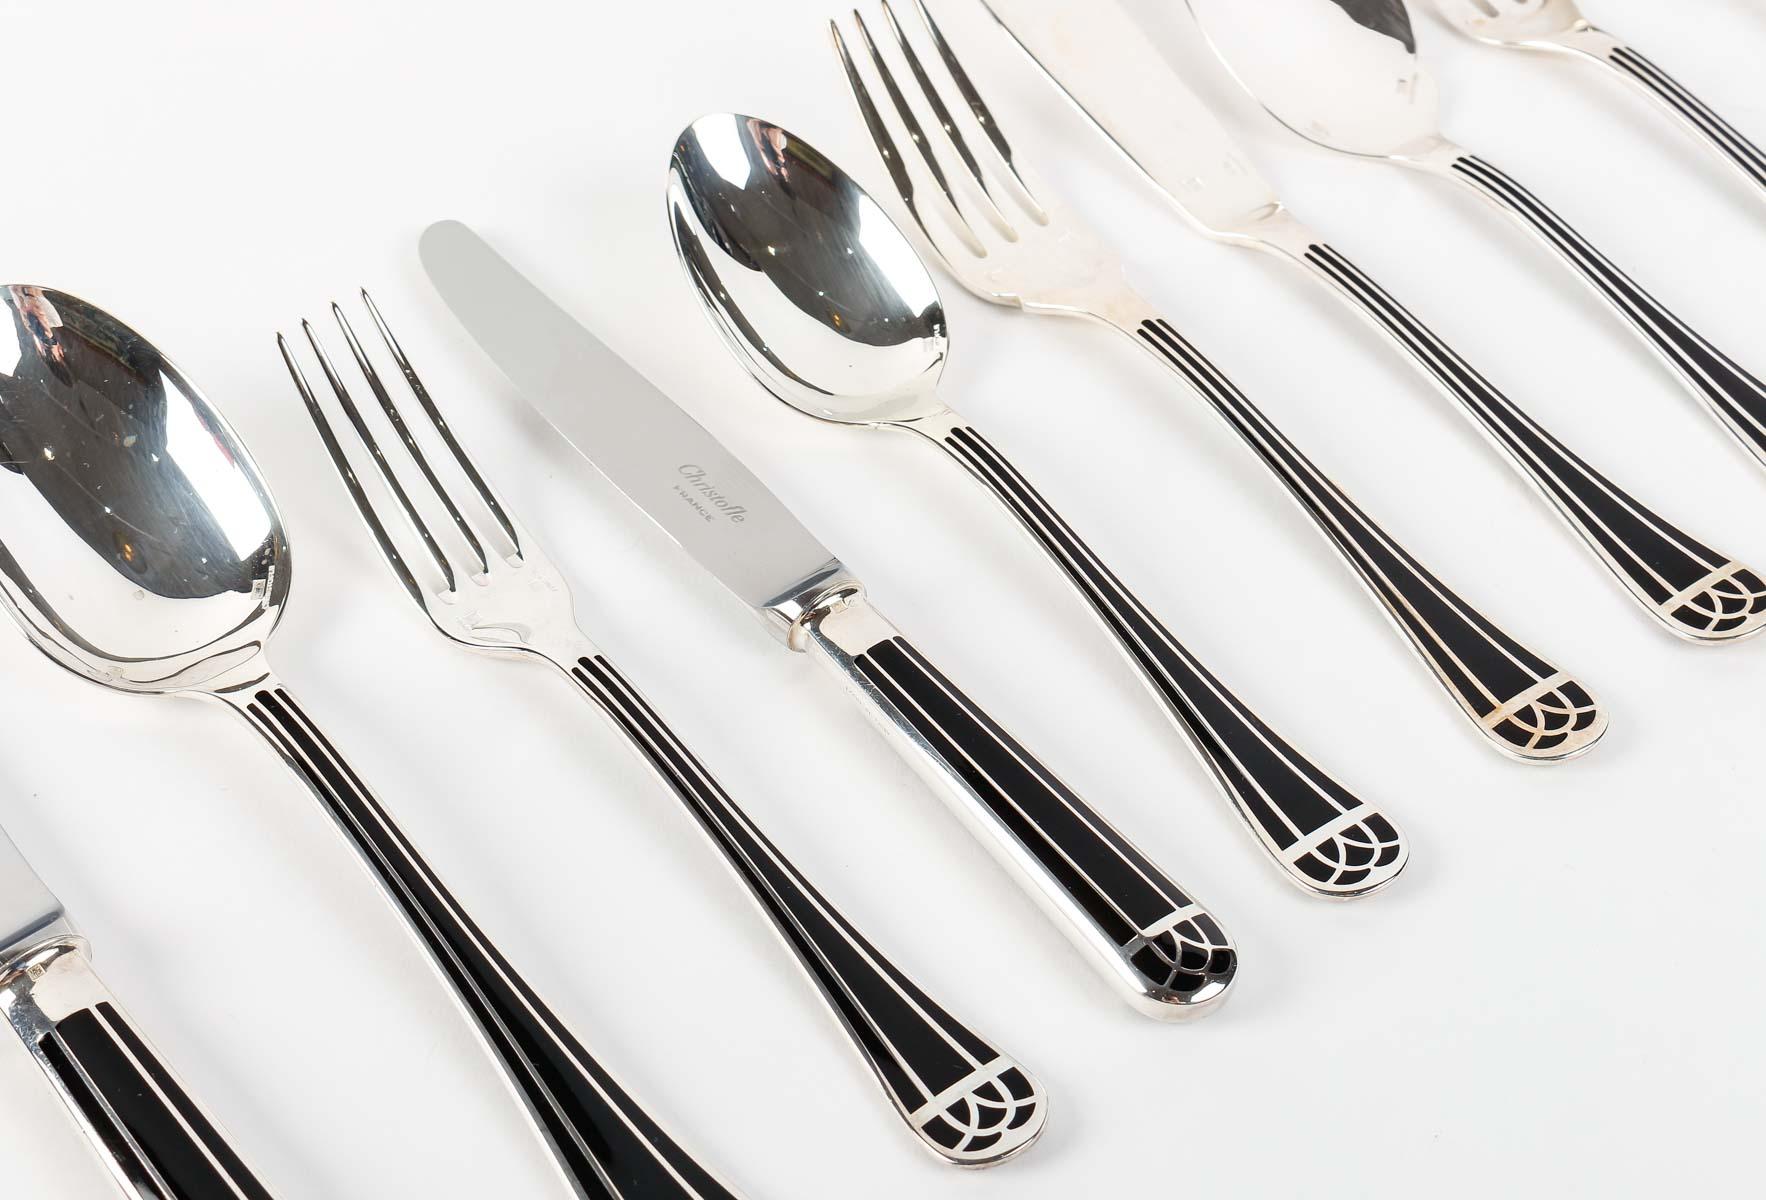 French Christofle - Flatware Cutlery Set Talisman Plated Silver & Black Lacquer 192 Pcs